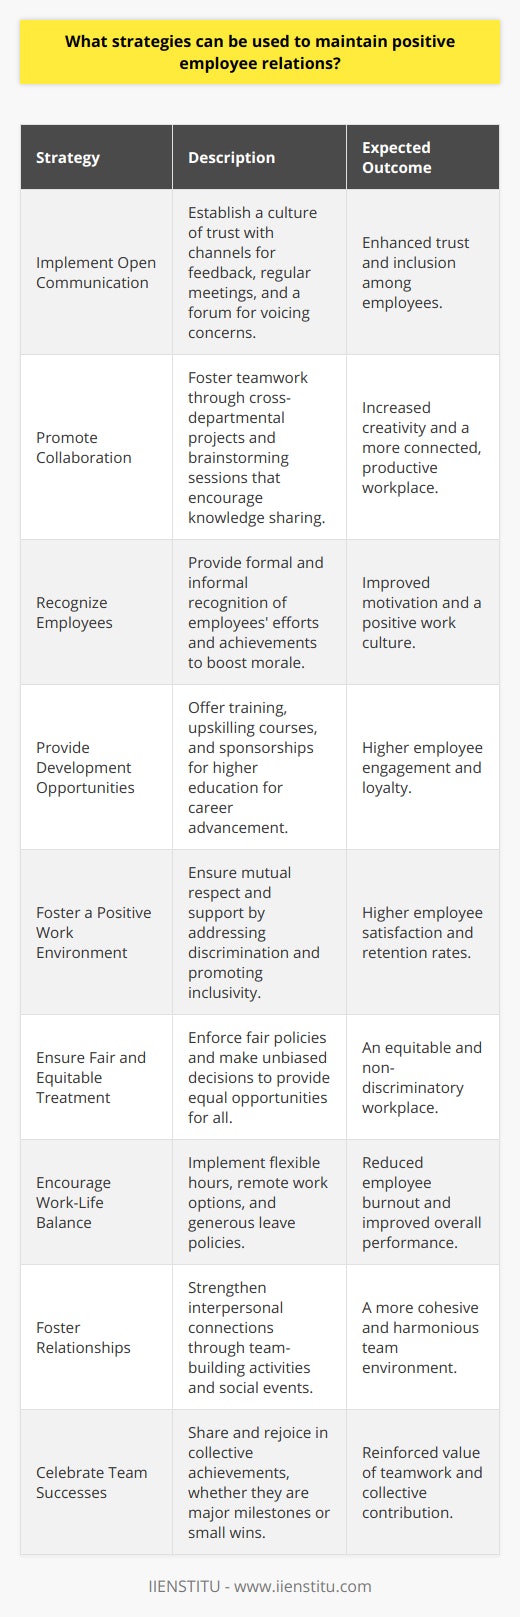 Employee relations are a critical aspect of any organization, and effectively nurturing them can lead to increased productivity, enhanced teamwork, and lower turnover rates. Below are strategies designed to maintain positive relations between employers and their workforce, while also fostering an environment where employees feel valued and motivated.1. **Implement Open Communication:** Transparent communication is the cornerstone of trust within an organization. Employers should establish a culture where feedback is not only encouraged but also duly considered and acted upon. Accessible communication channels, regular meetings, and forums for employees to voice their concerns and opinions can help in fostering a sense of inclusion.2. **Promote Collaboration:** A collaborative atmosphere enhances creativity and innovation. Encouraging employees to engage in teamwork, share knowledge, and support one another can lead to a more connected and productive workplace. This may involve setting up cross-departmental projects or brainstorming sessions where everyone has the opportunity to contribute.3. **Recognize Employees:** Regular recognition of effort and achievements can greatly boost employee morale. This could take various forms such as formal award ceremonies, bonuses, or simply public acknowledgment during meetings. Genuine appreciation not only motivates the recipient but also sets a positive example for others to emulate.4. **Provide Development Opportunities:** To maintain a competitive edge and retain talent, organizations should offer opportunities for professional growth. This includes training programs, upskilling courses, workshops, or even sponsorship for higher education. When employees see a clear path for advancement, they are likely to be more engaged and loyal.5. **Foster a Positive Work Environment:** A workplace that promotes mutual respect, diversity, and a culture of support is likely to have higher employee satisfaction rates. Employers can create such an environment by addressing any form of discrimination or harassment promptly and by establishing clear company values that emphasize respect and inclusivity.6. **Ensure Fair and Equitable Treatment:** Fairness in an organization is non-negotiable. This means providing equal opportunities for all employees and making decisions that are free from bias. Regularly reviewing policies and procedures can help ensure that the workplace remains equitable.7. **Encourage Work-Life Balance:** Employees perform optimally when they have a good balance between their work and personal lives. Offering flexible working hours, remote work options, and generous leave policies can help staff manage their time effectively and reduce burnout.8. **Foster Relationships:** Positive interpersonal relationships among employees can lead to a more harmonious work environment. Team-building activities, social events, or informal gatherings can help break down barriers and encourage friendships, leading to a more cohesive team.9. **Celebrate Team Successes:** Celebrating both small wins and significant achievements as a team can reinforce the value of collective effort. This not only makes individuals feel recognized but also solidifies the sense of team accomplishment. Celebrations can be simple shout-outs in team meetings or organized events to mark major milestones.Implementing these strategies requires commitment and consistency from the management of the organization. By ensuring that these approaches are not just sporadic actions but part of an overarching employee relations strategy, companies can create a positive work culture that drives success. Education and training for management on how to effectively apply these strategies can be facilitated by professional organizations, such as IIENSTITU, which specialize in workforce development. By prioritizing employee relations, employers are investing in their most valuable asset - their people.